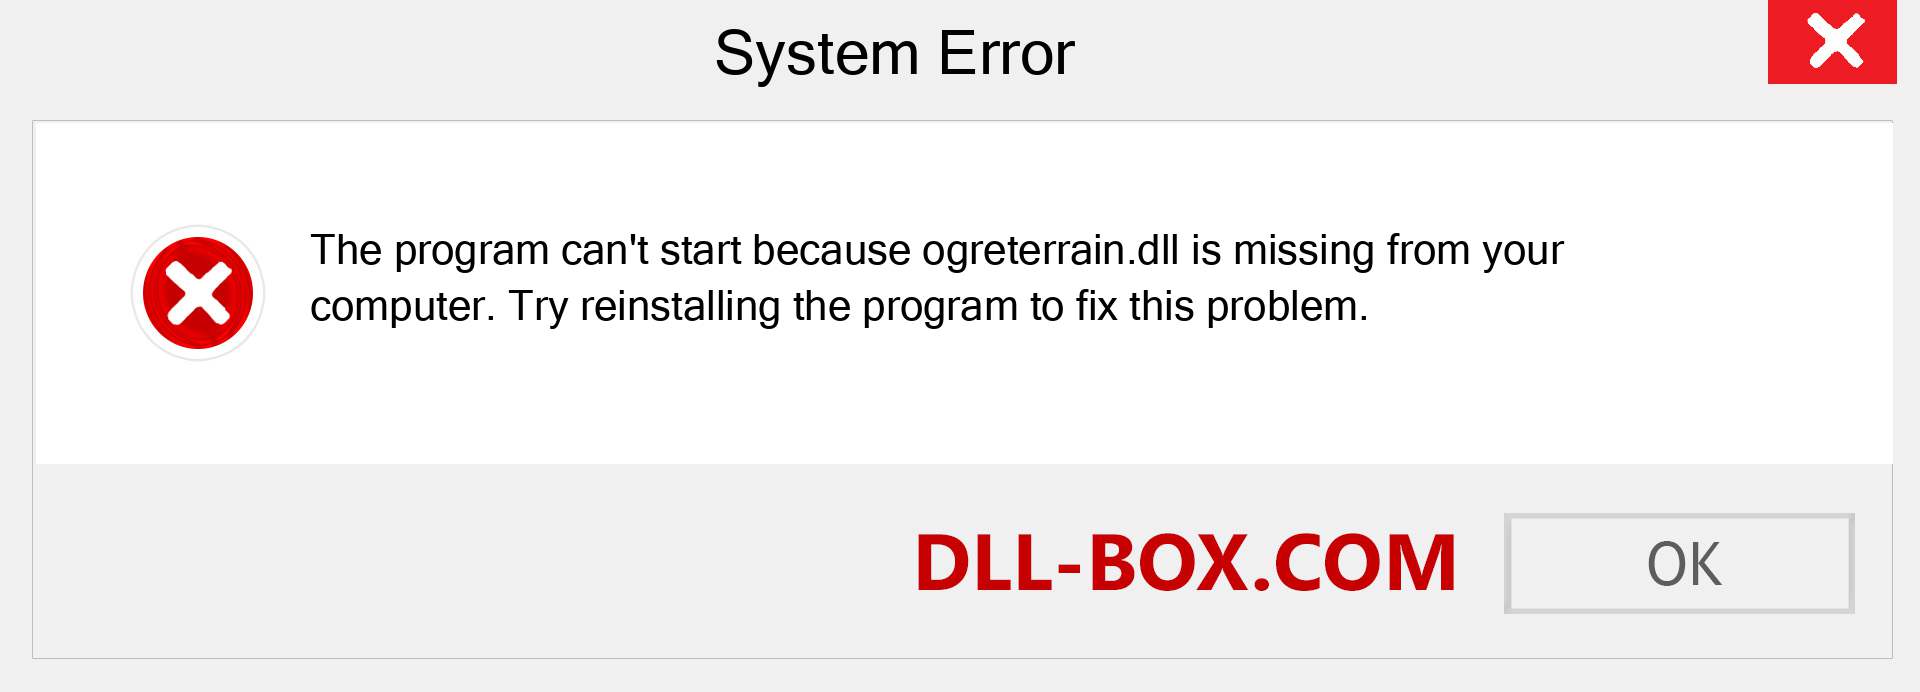  ogreterrain.dll file is missing?. Download for Windows 7, 8, 10 - Fix  ogreterrain dll Missing Error on Windows, photos, images